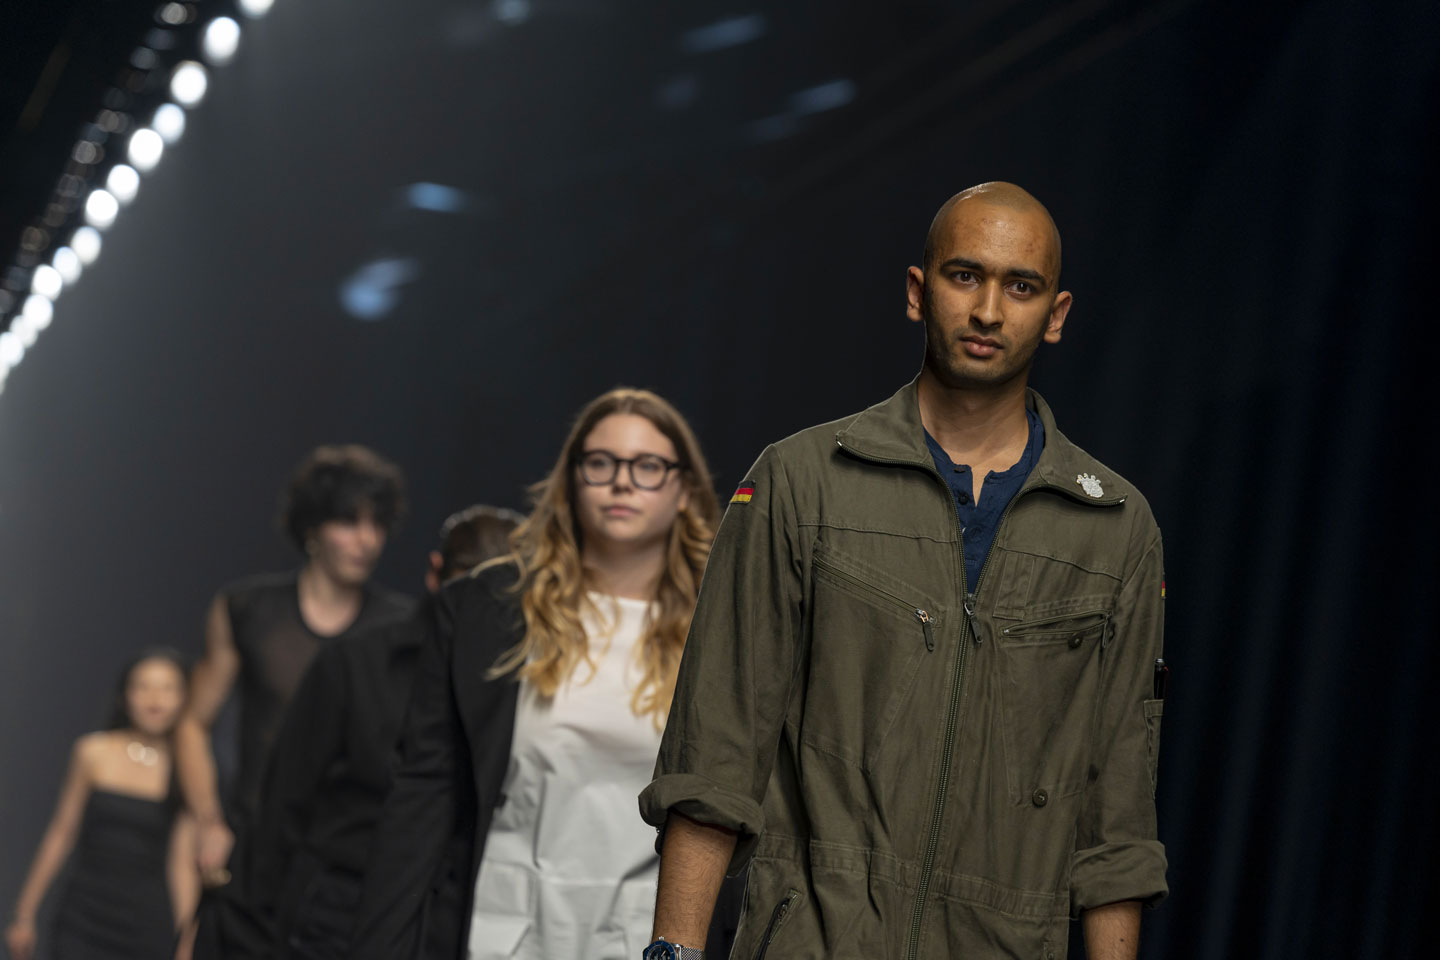 Madhav Bahety after presenting his collection at Istituto Marangoni's Turn Up fashion show